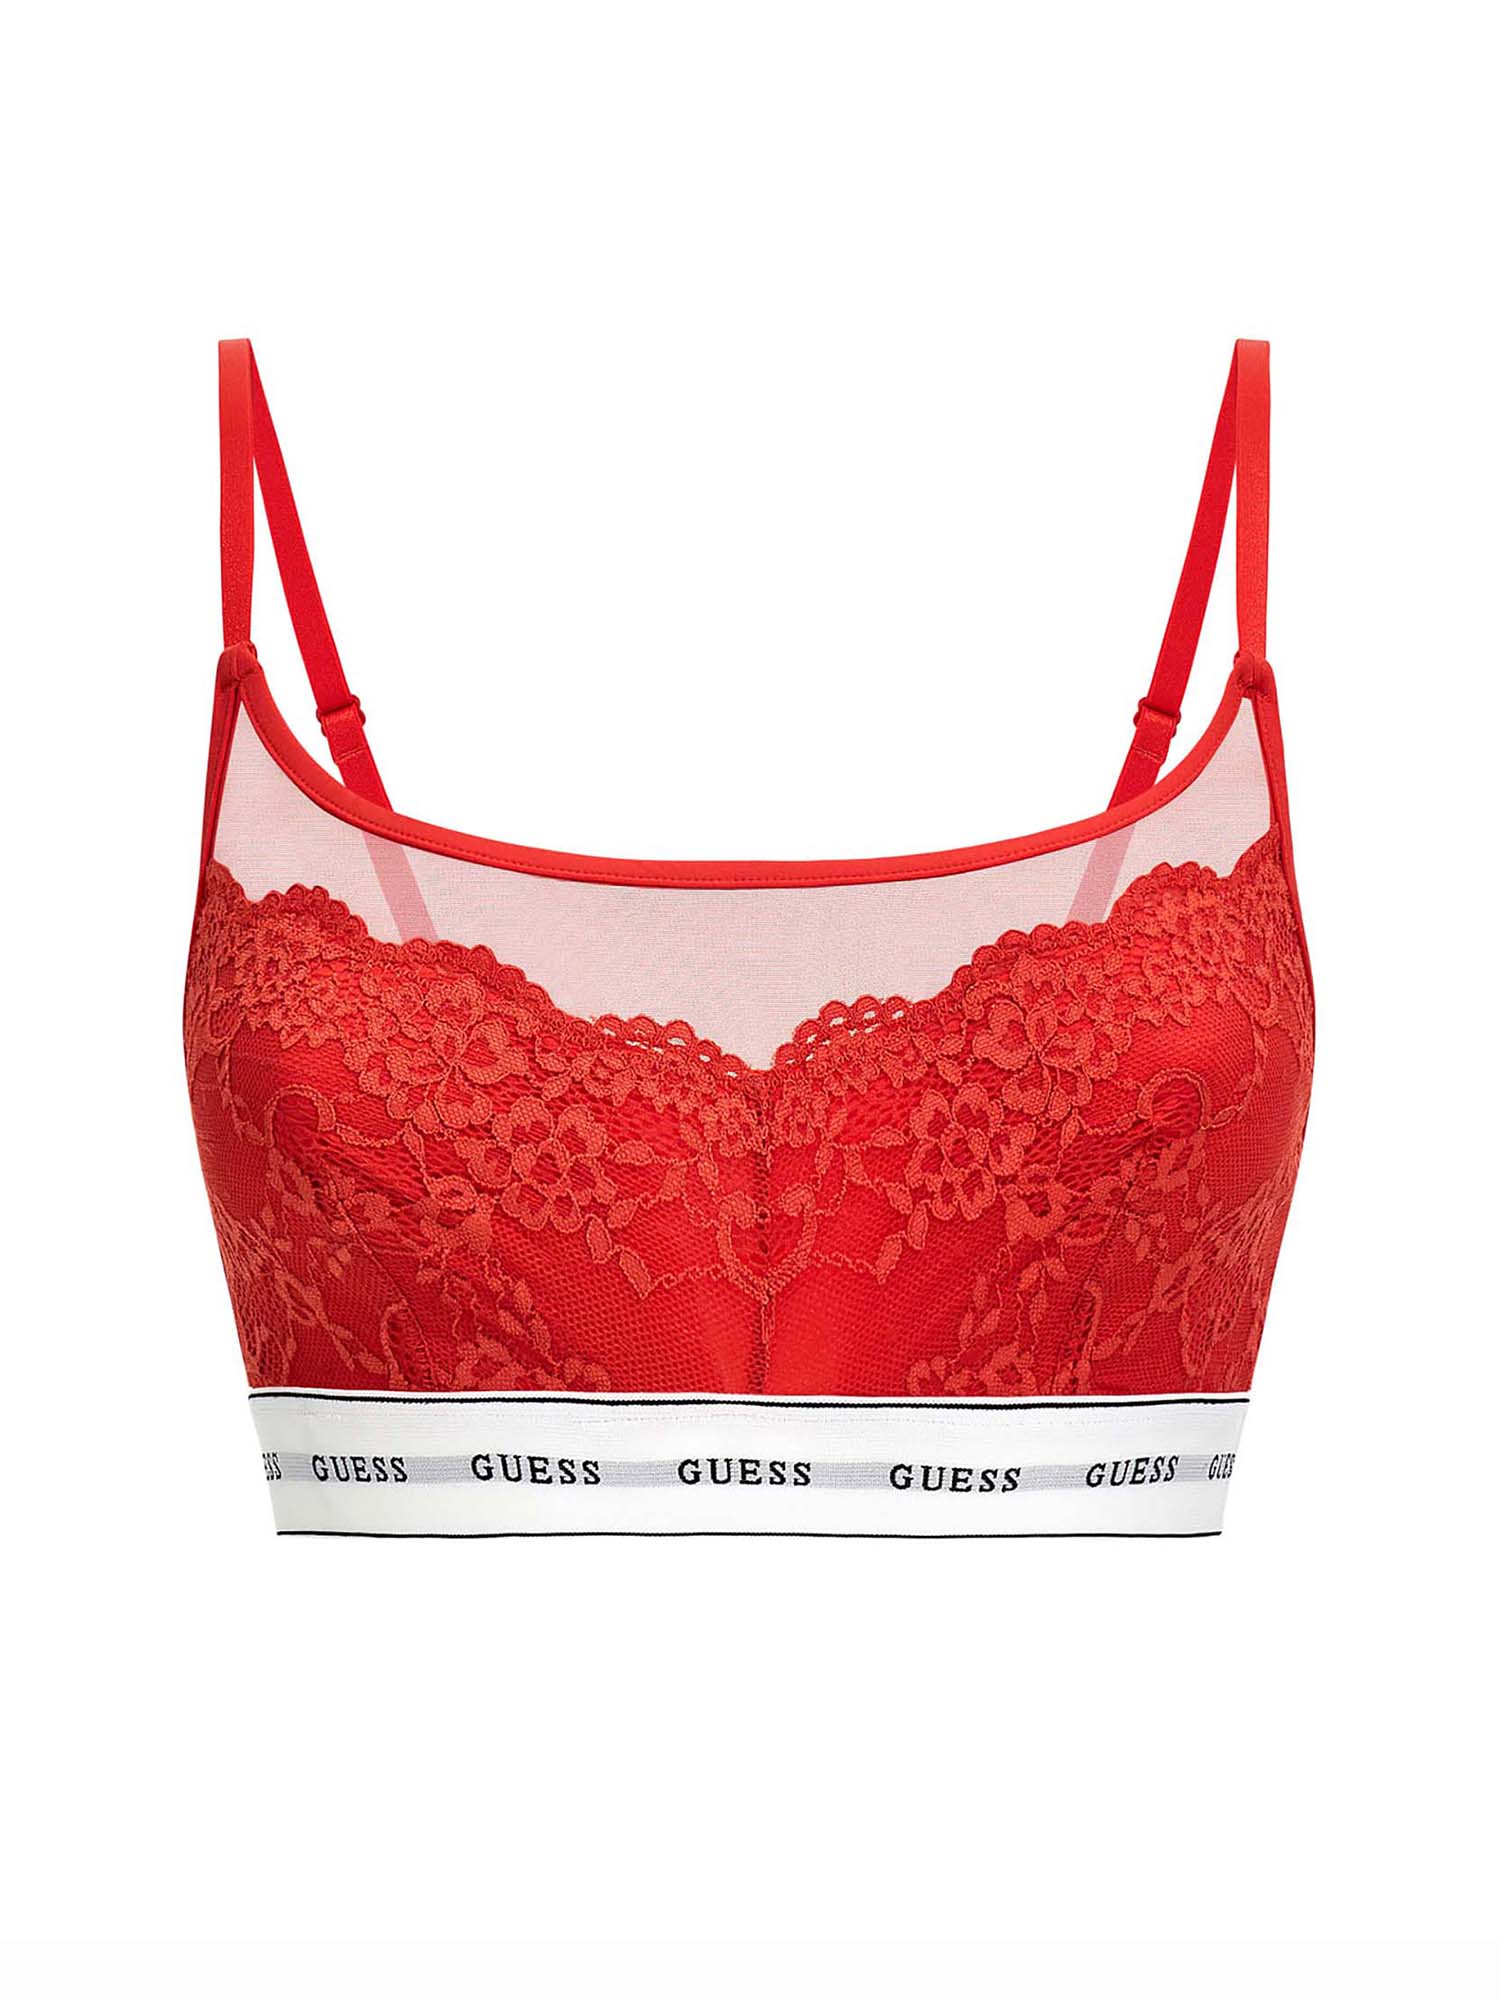 BRALETTE DONNA - GUESS UNDERWEAR - O2BC07 KBBT0 - ROSSO, S